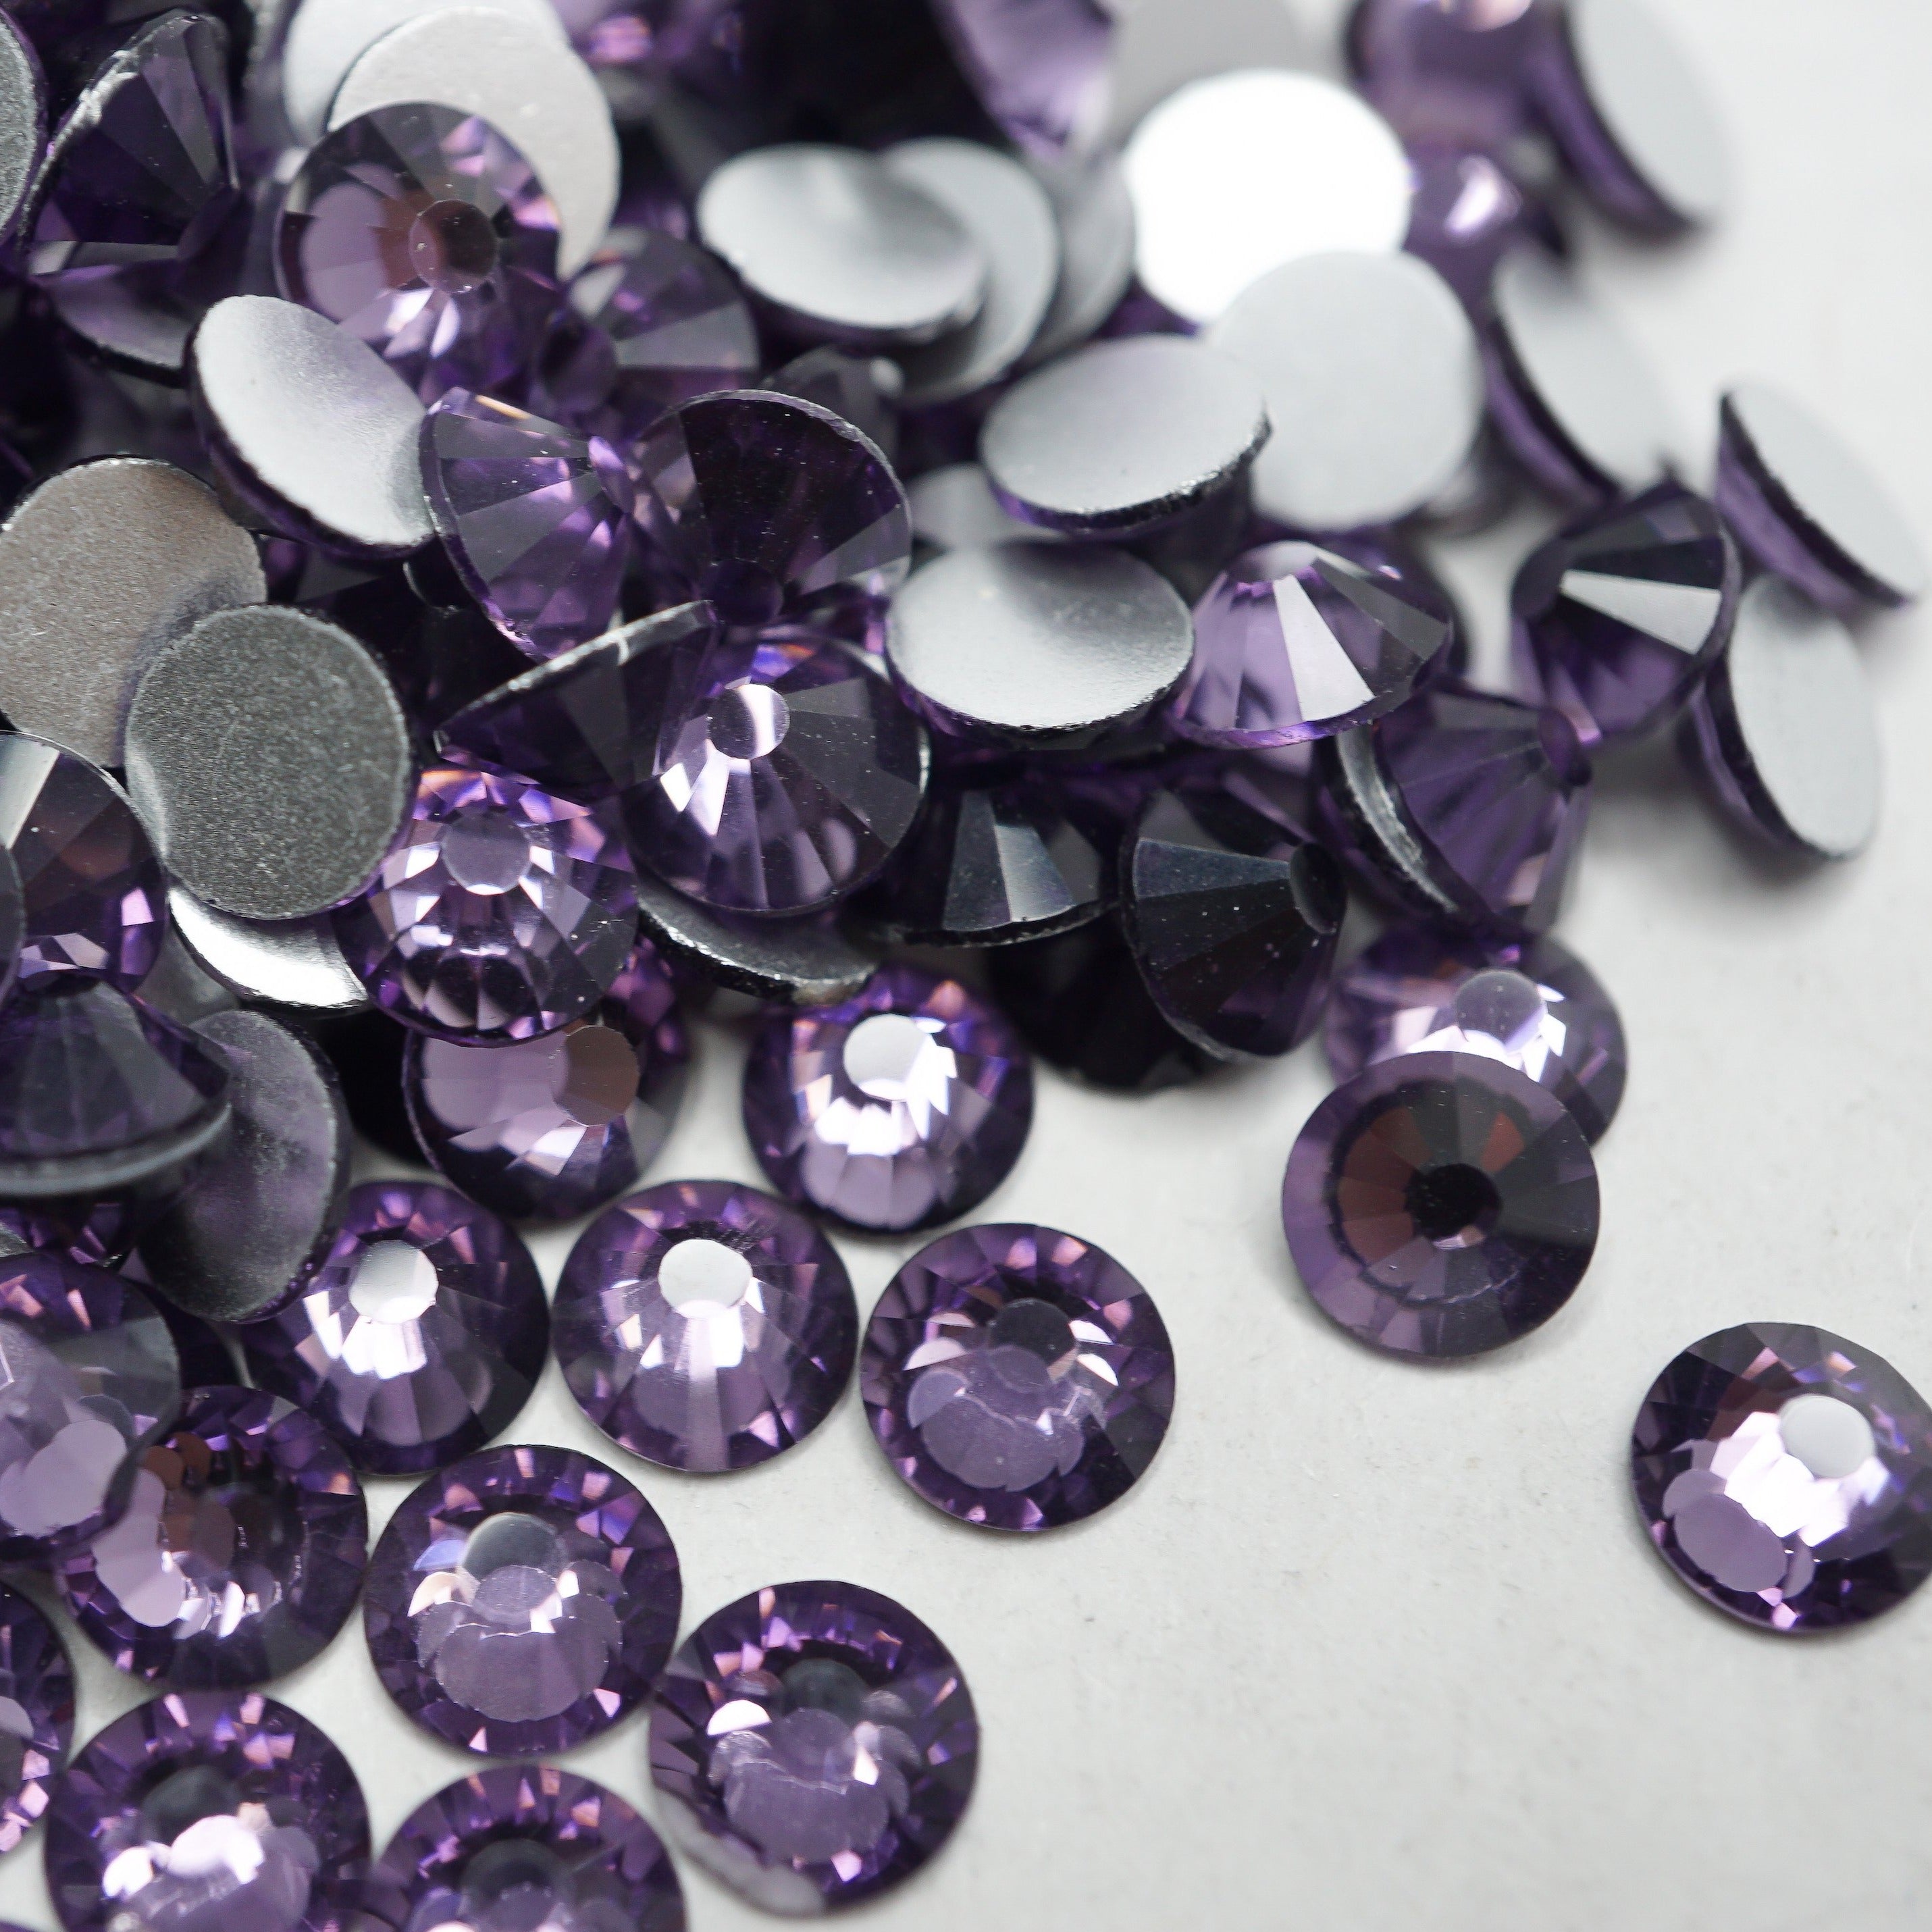 High Quality Crystals LILAC PURPLE Rhinestones Loose Flat Back No Hot Fix  Bead Size Ss16 / Ss30 